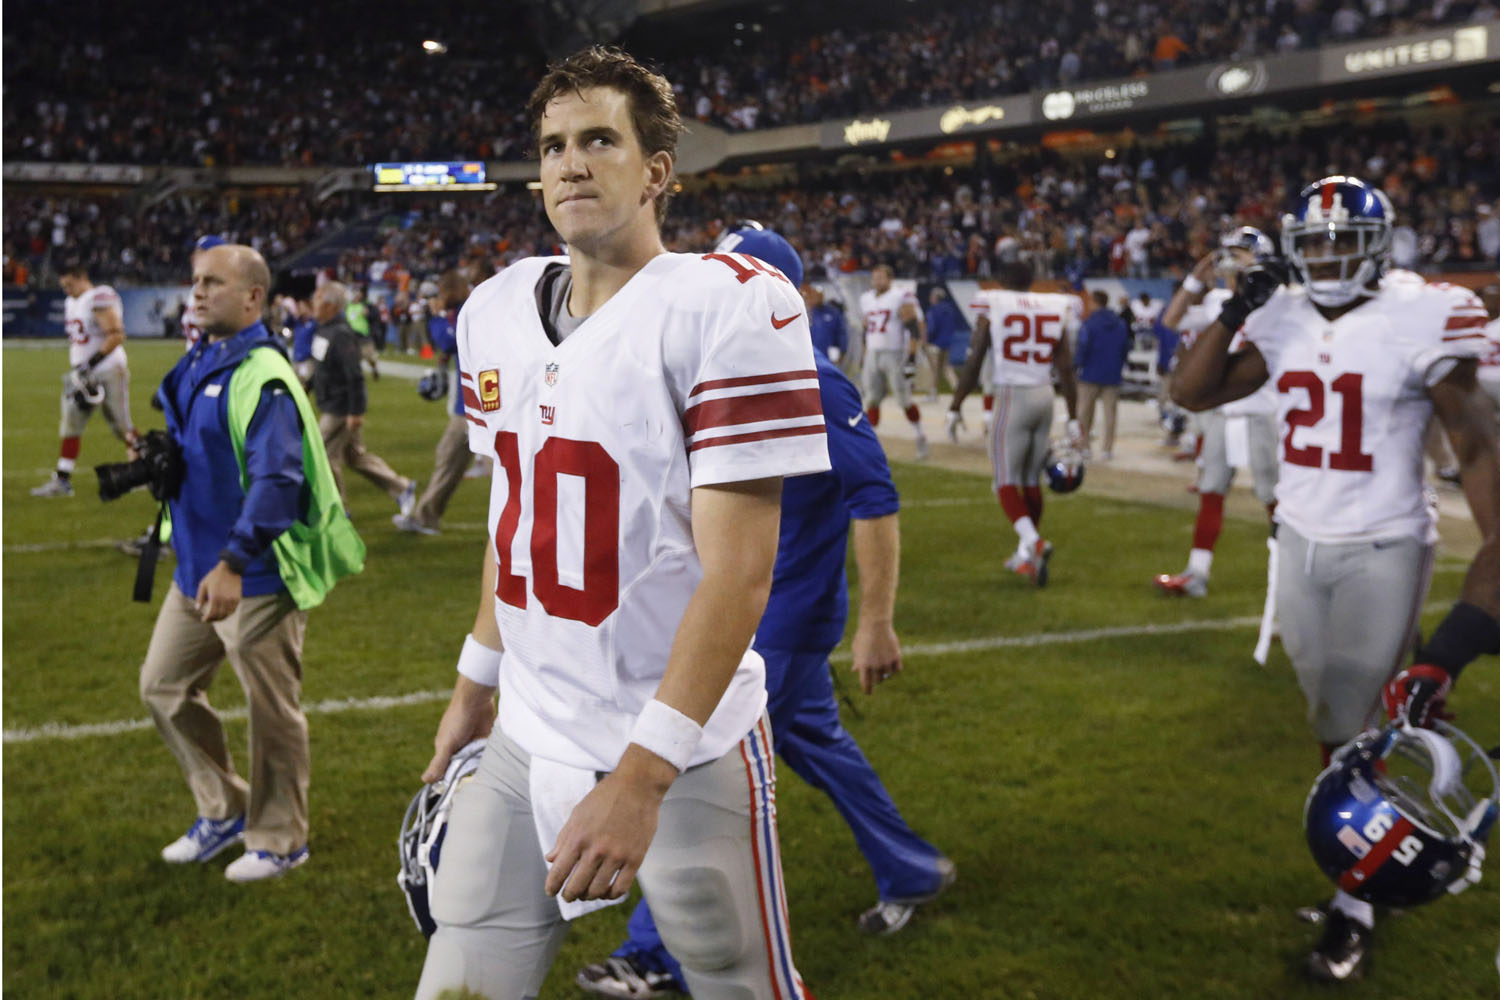 Oct. 10, 2013. New York Giants quarterback Eli Manning (10) walks off the field after the Giants' 27-21 loss to the Chicago Bears in an NFL football game n Chicago.